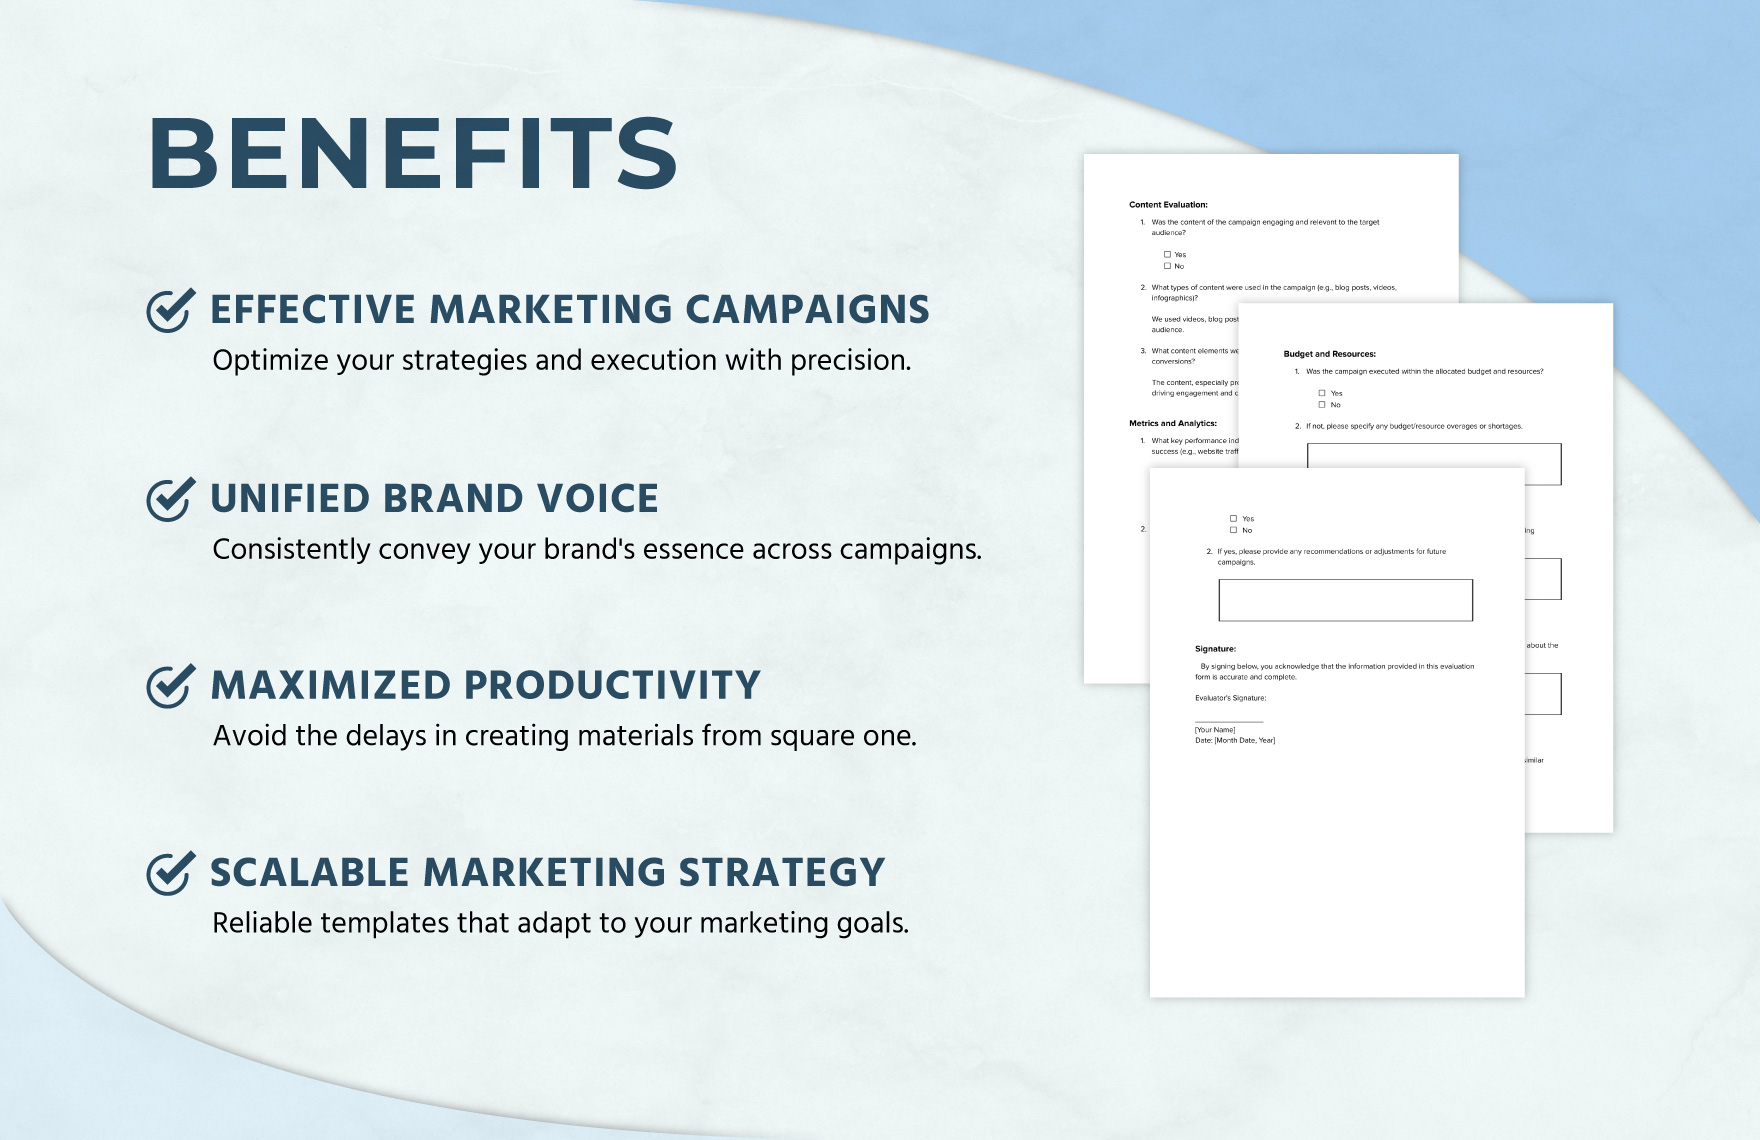 Marketing Campaign Result Evaluation Template